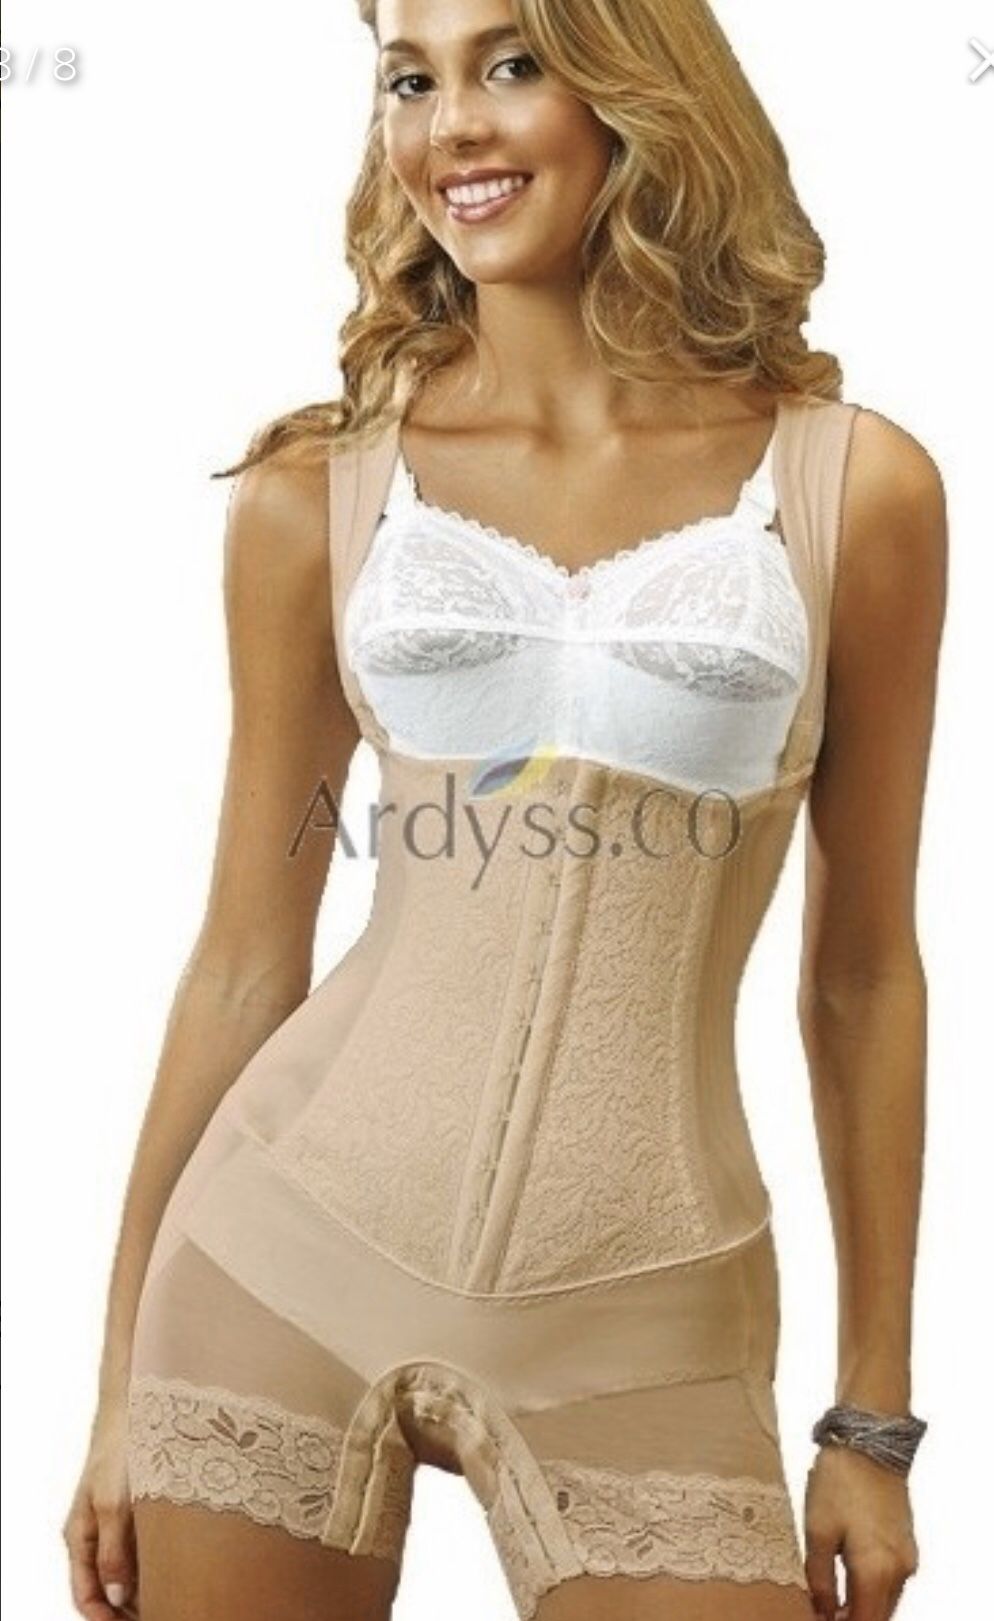 New Faja Ardyss body magic size M !! for Sale in Fort Worth, TX